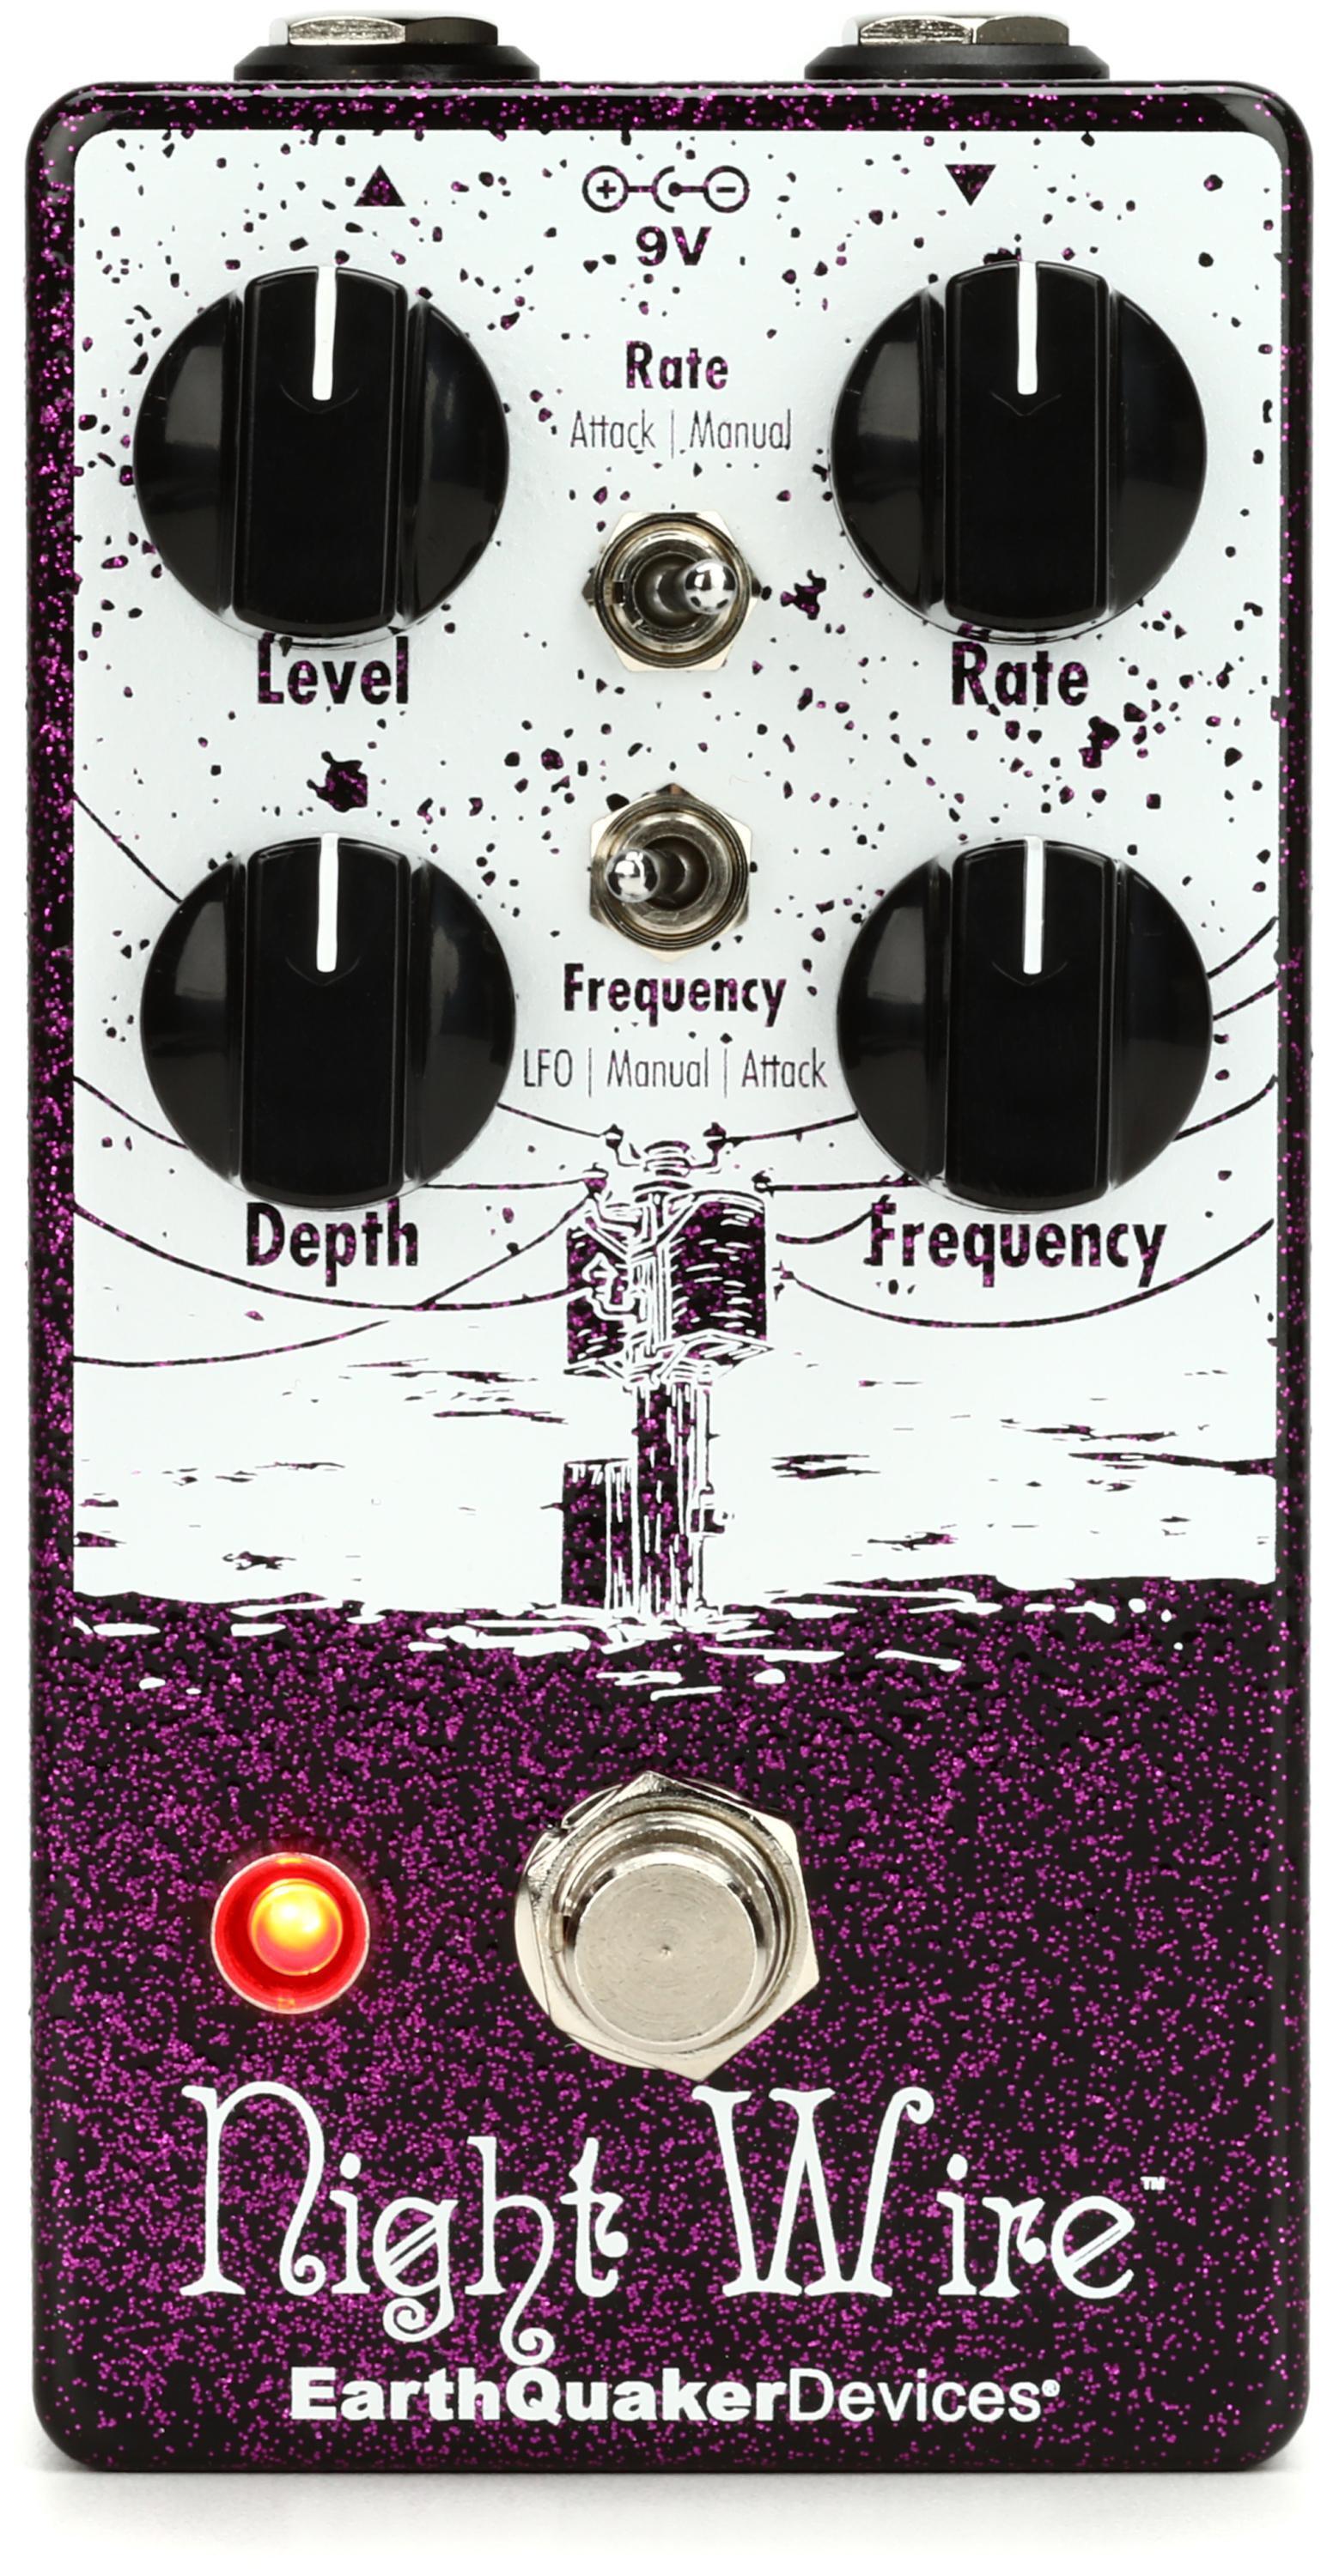 earthquaker devices Night Wire トレモロ MXR-